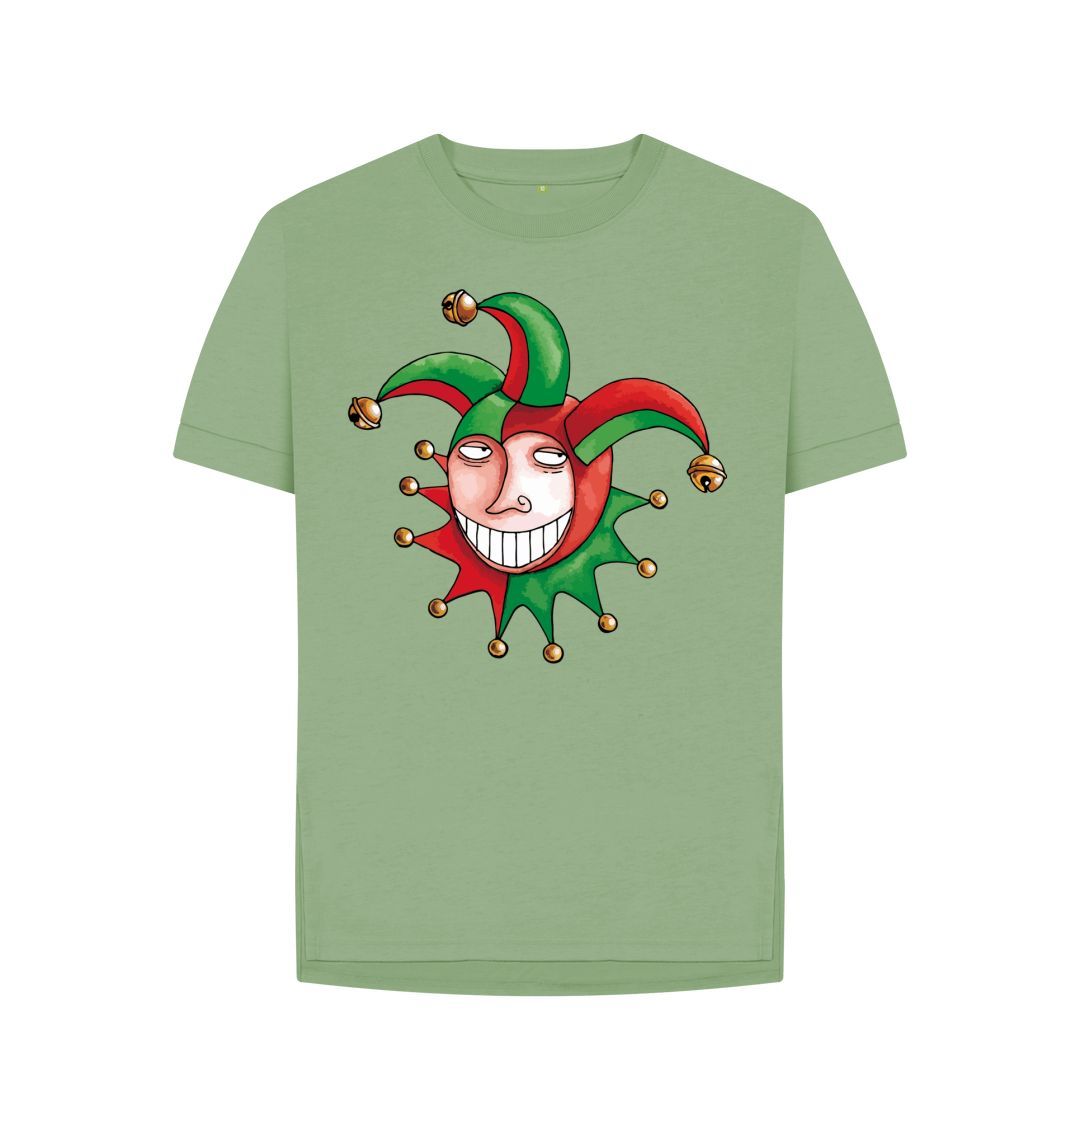 Sage The Jester Women's Relaxed Fit Tee